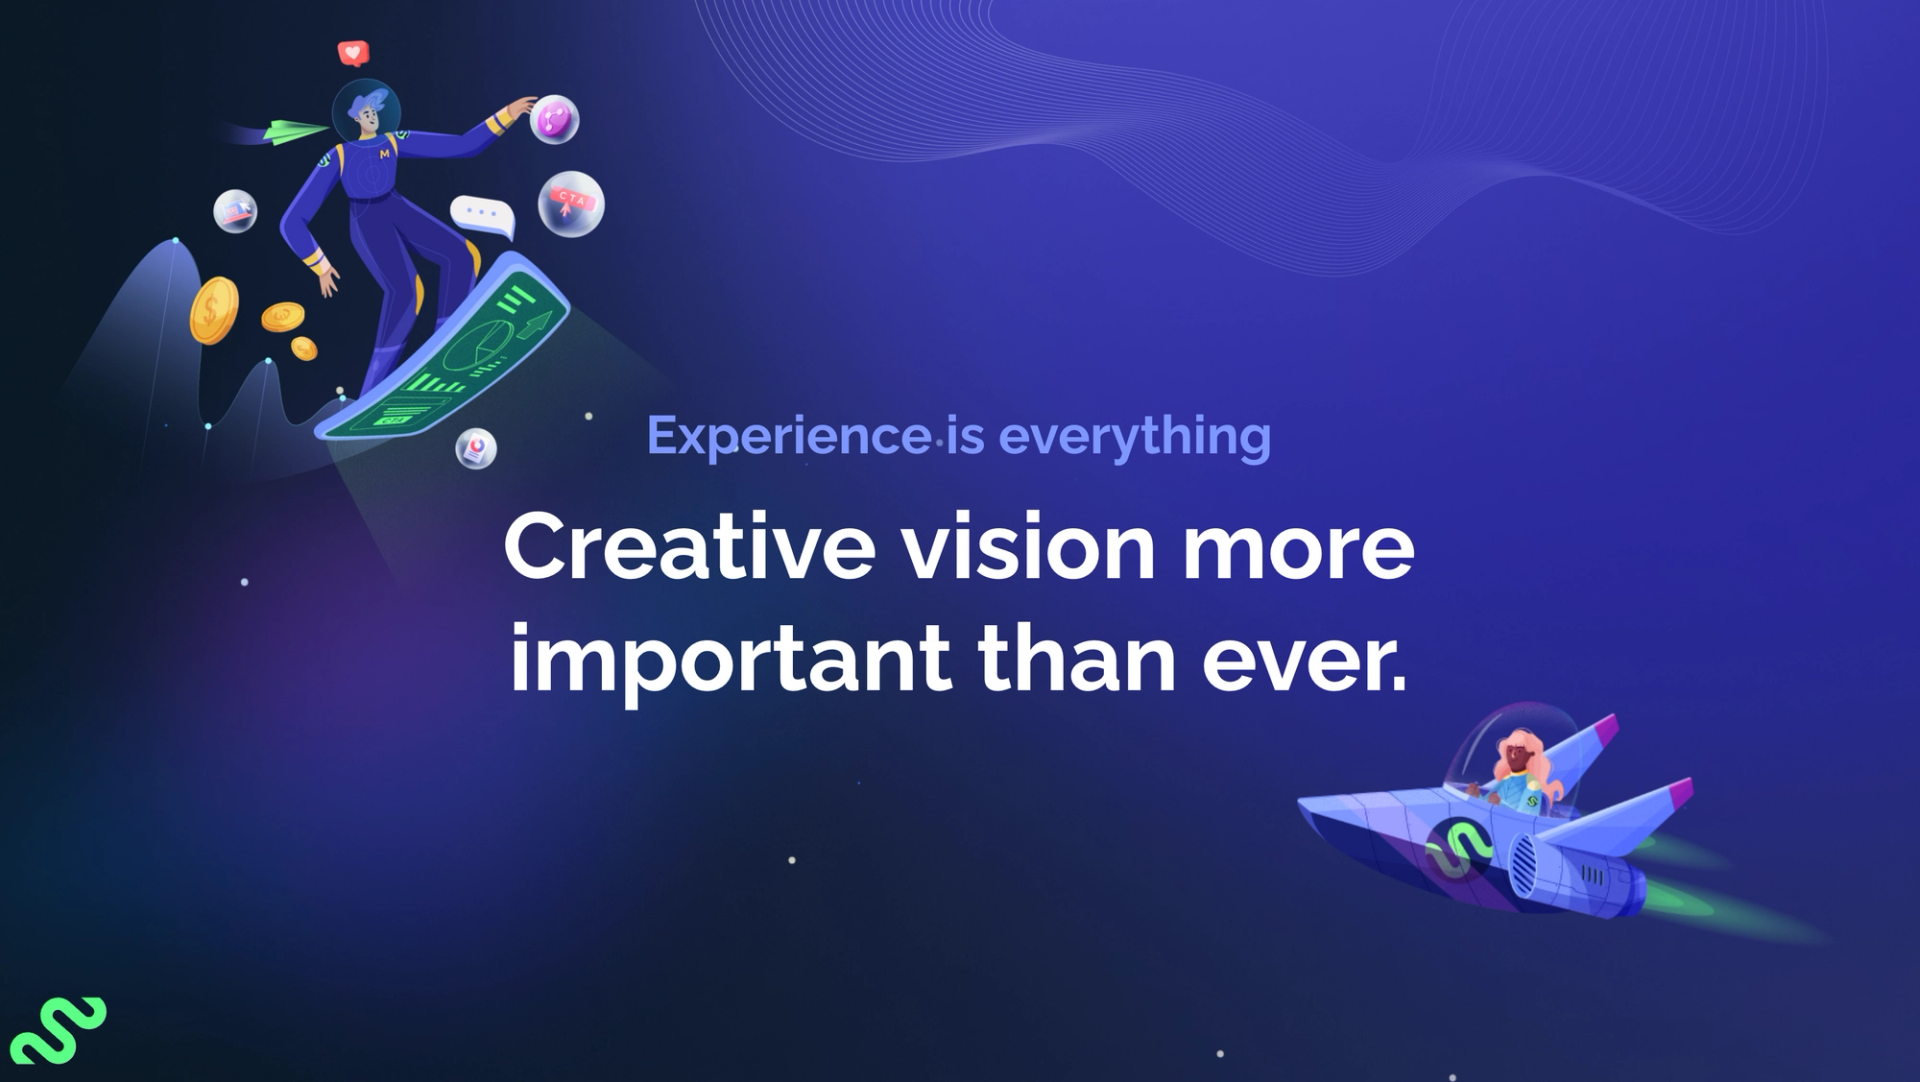 Experience is everything. Creative vision more important than ever.